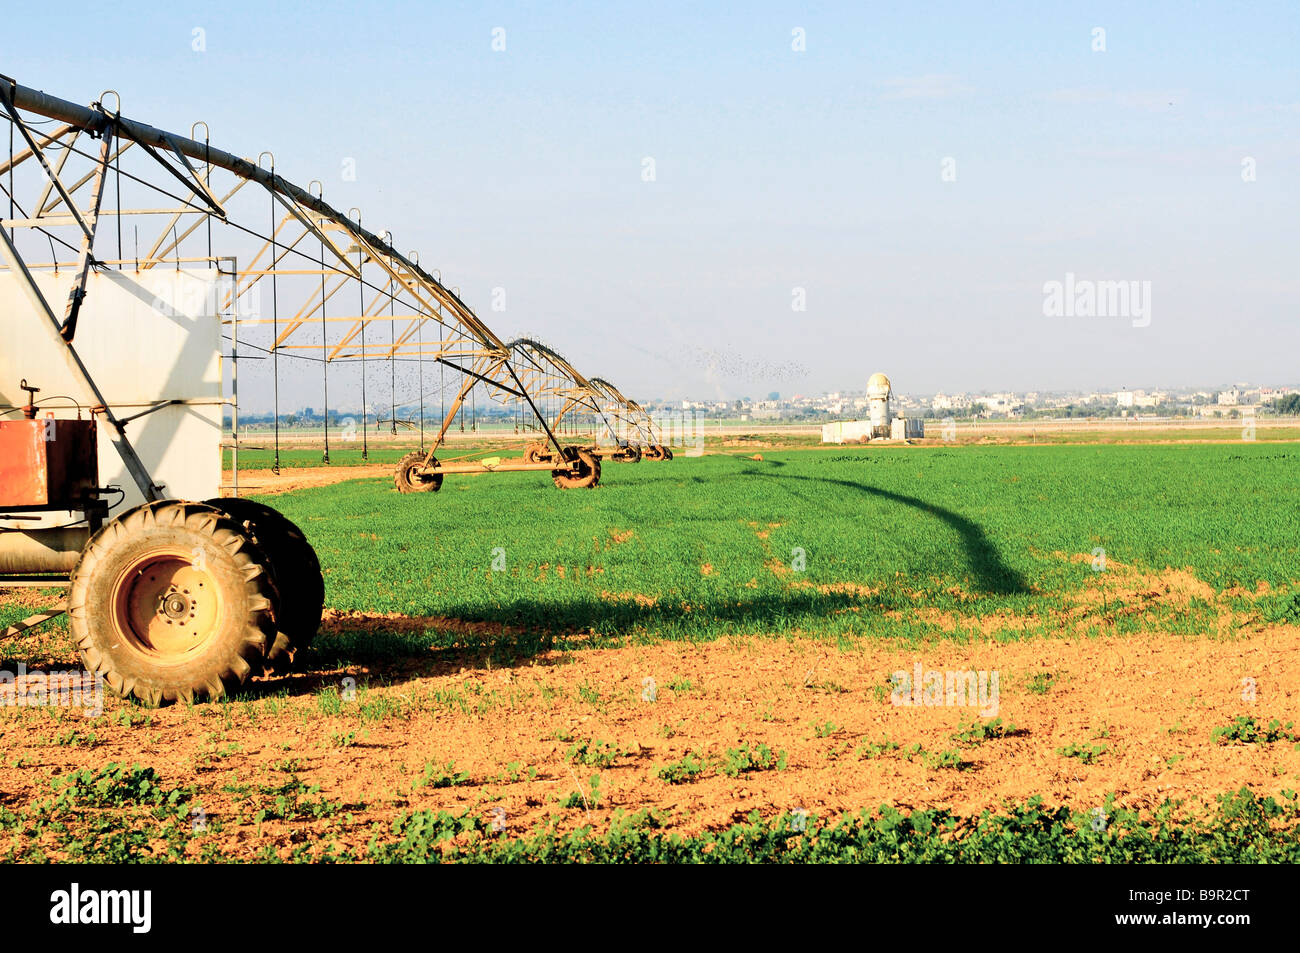 Israel, Negev  Wheat Field Gaza in the background A Kassam Missile can be seen launched on the left Stock Photo